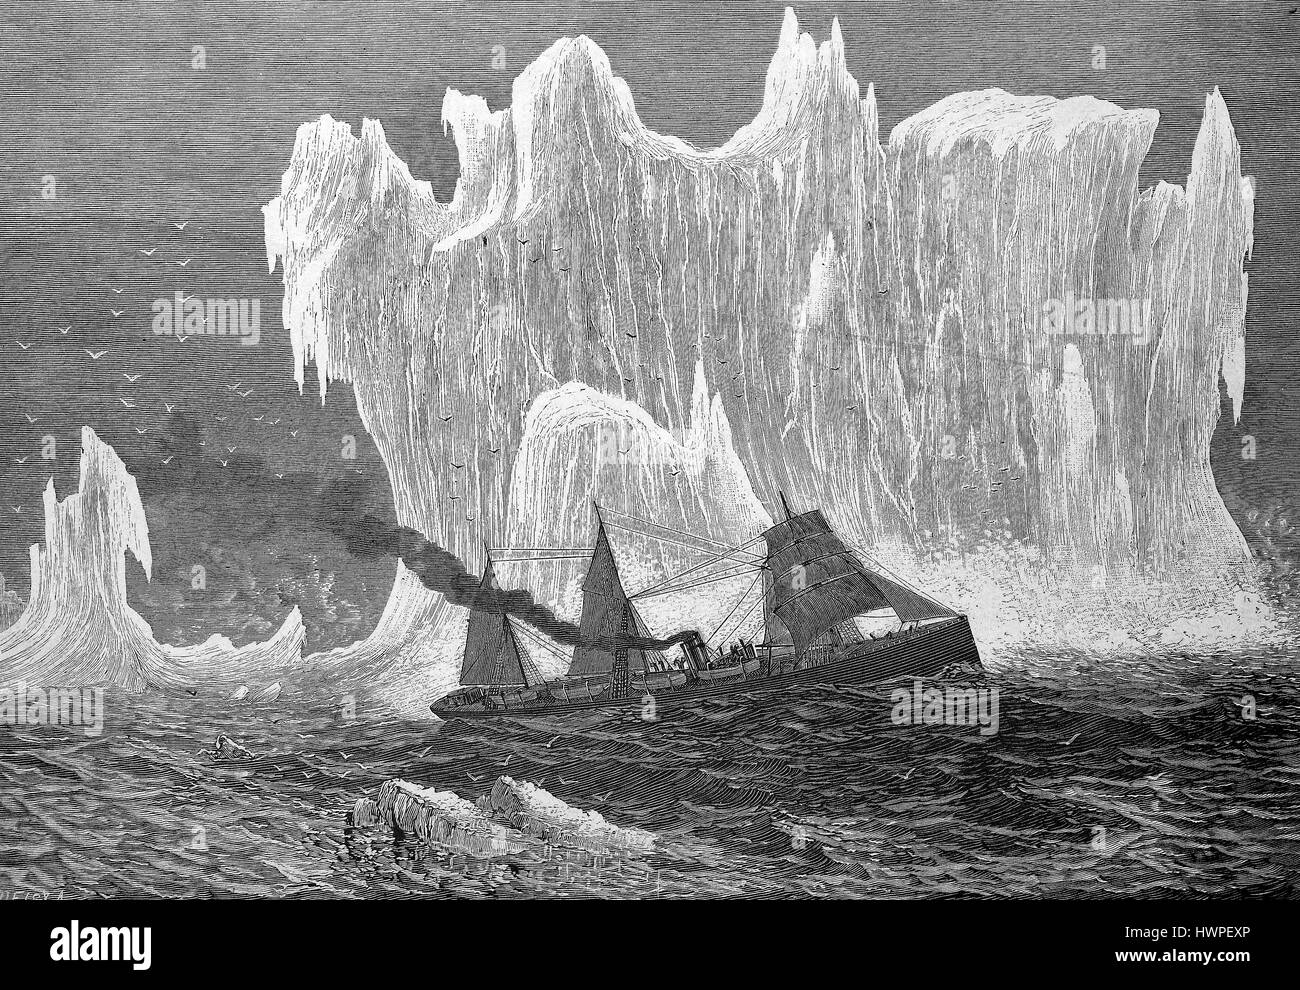 Steam boat on the way to New York meets a giant iceberg, Reproduction of an original woodcut from the year 1882, digital improved Stock Photo